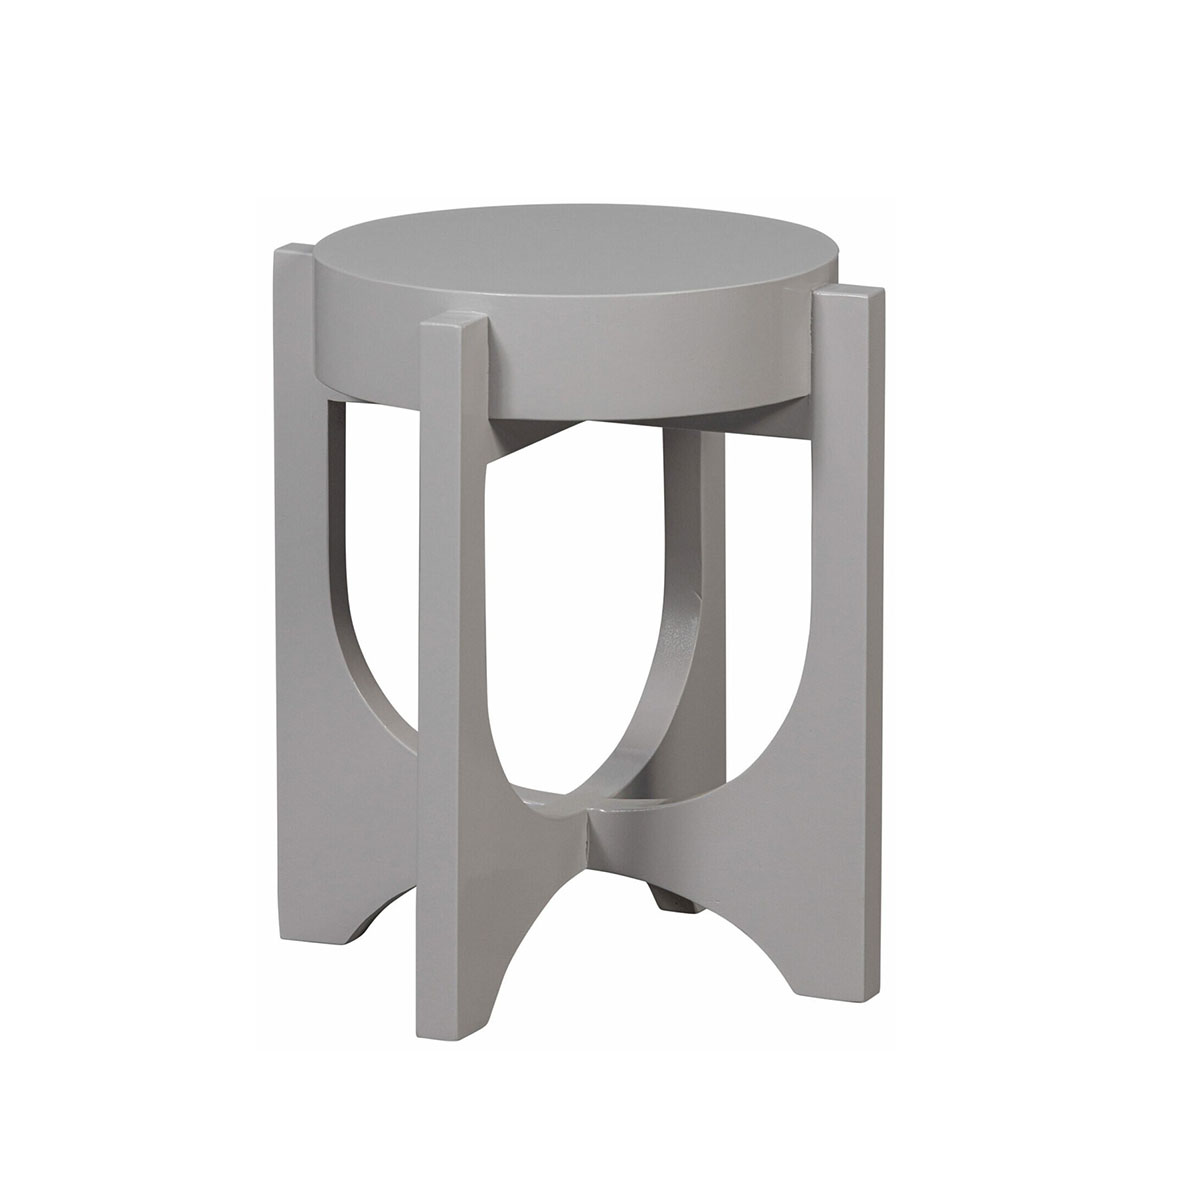 HOLD UP SMALL SIDE TABLE